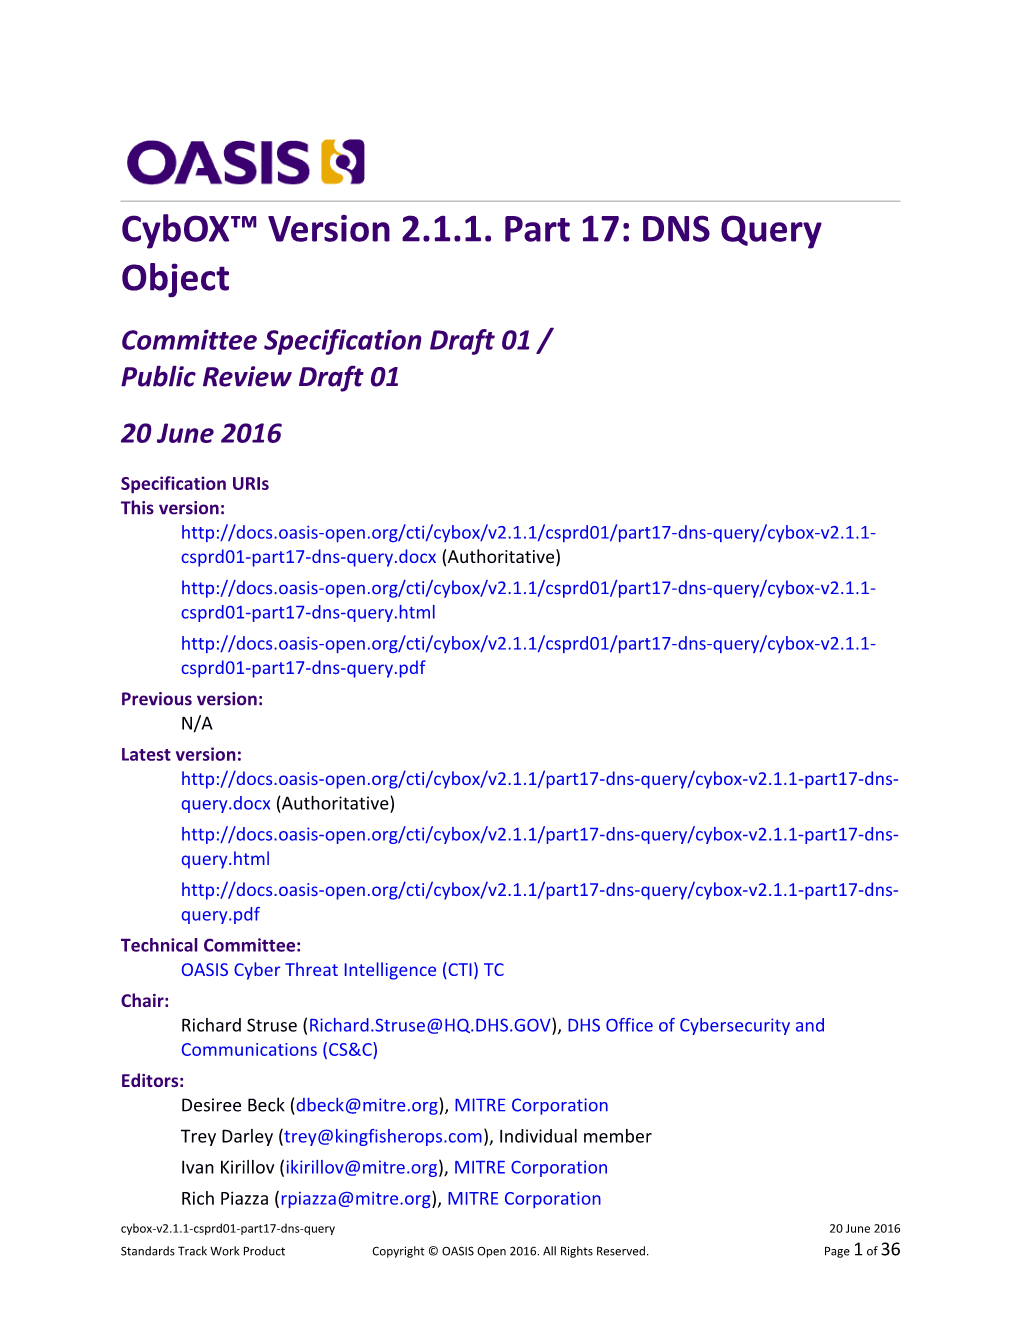 Cybox Version 2.1.1. Part 17: DNS Query Object